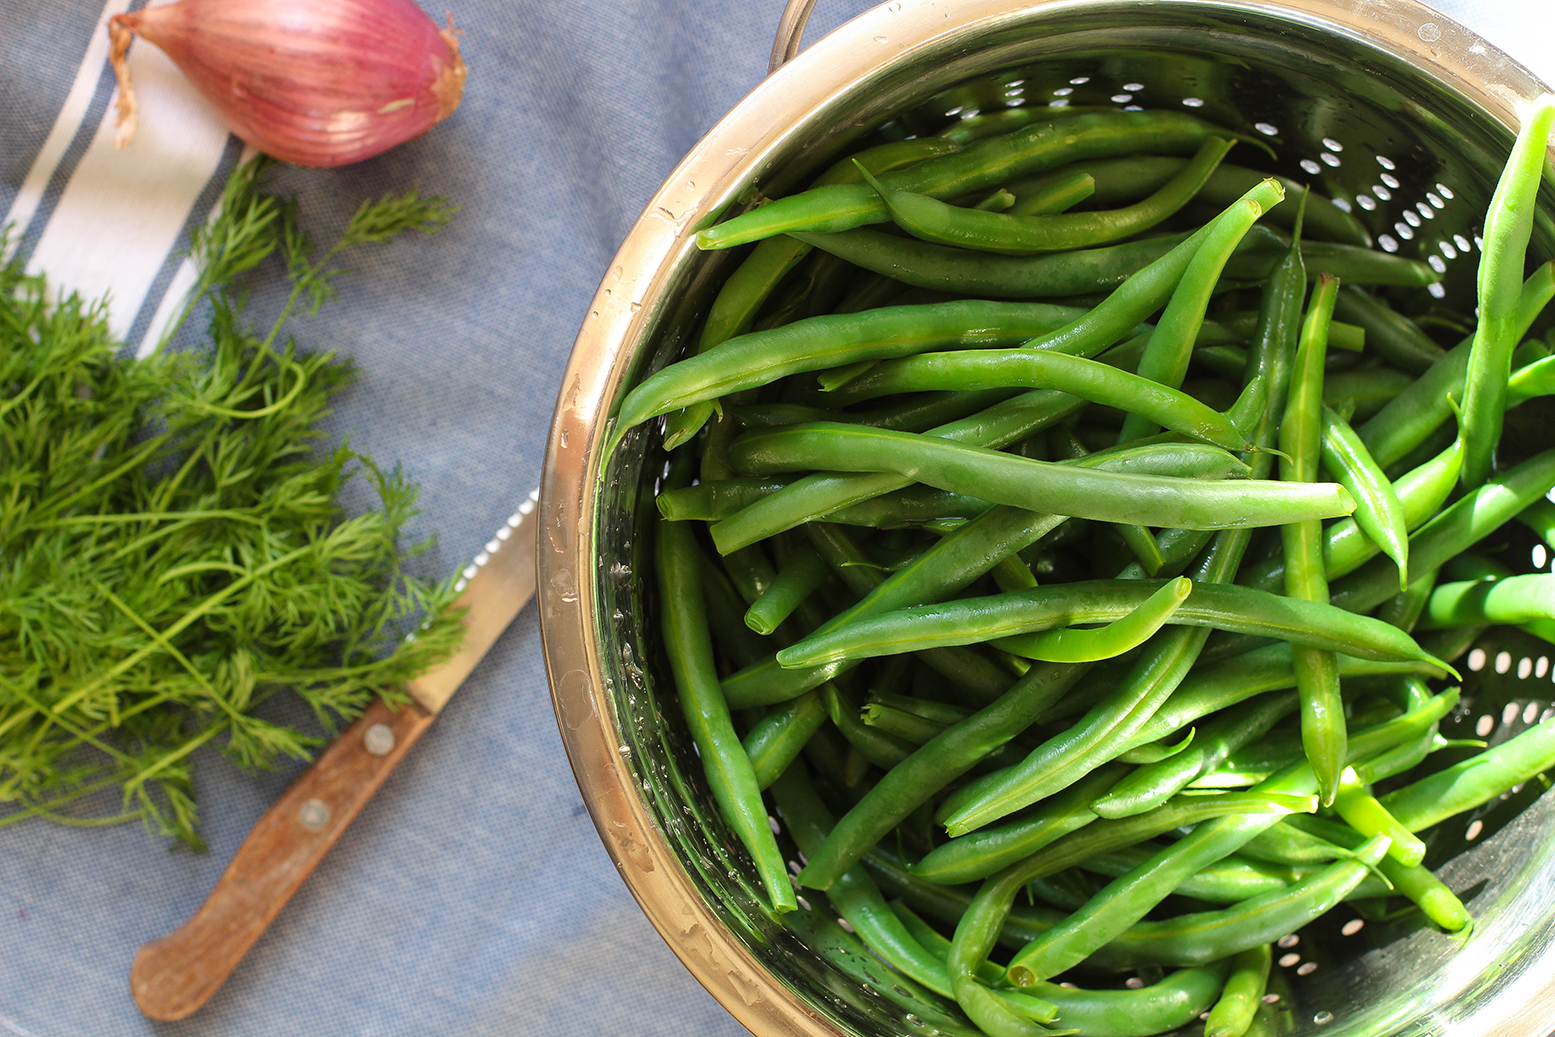 Apple Cider Green Beans with shallots & dill - an easy vegan & gluten free holiday side